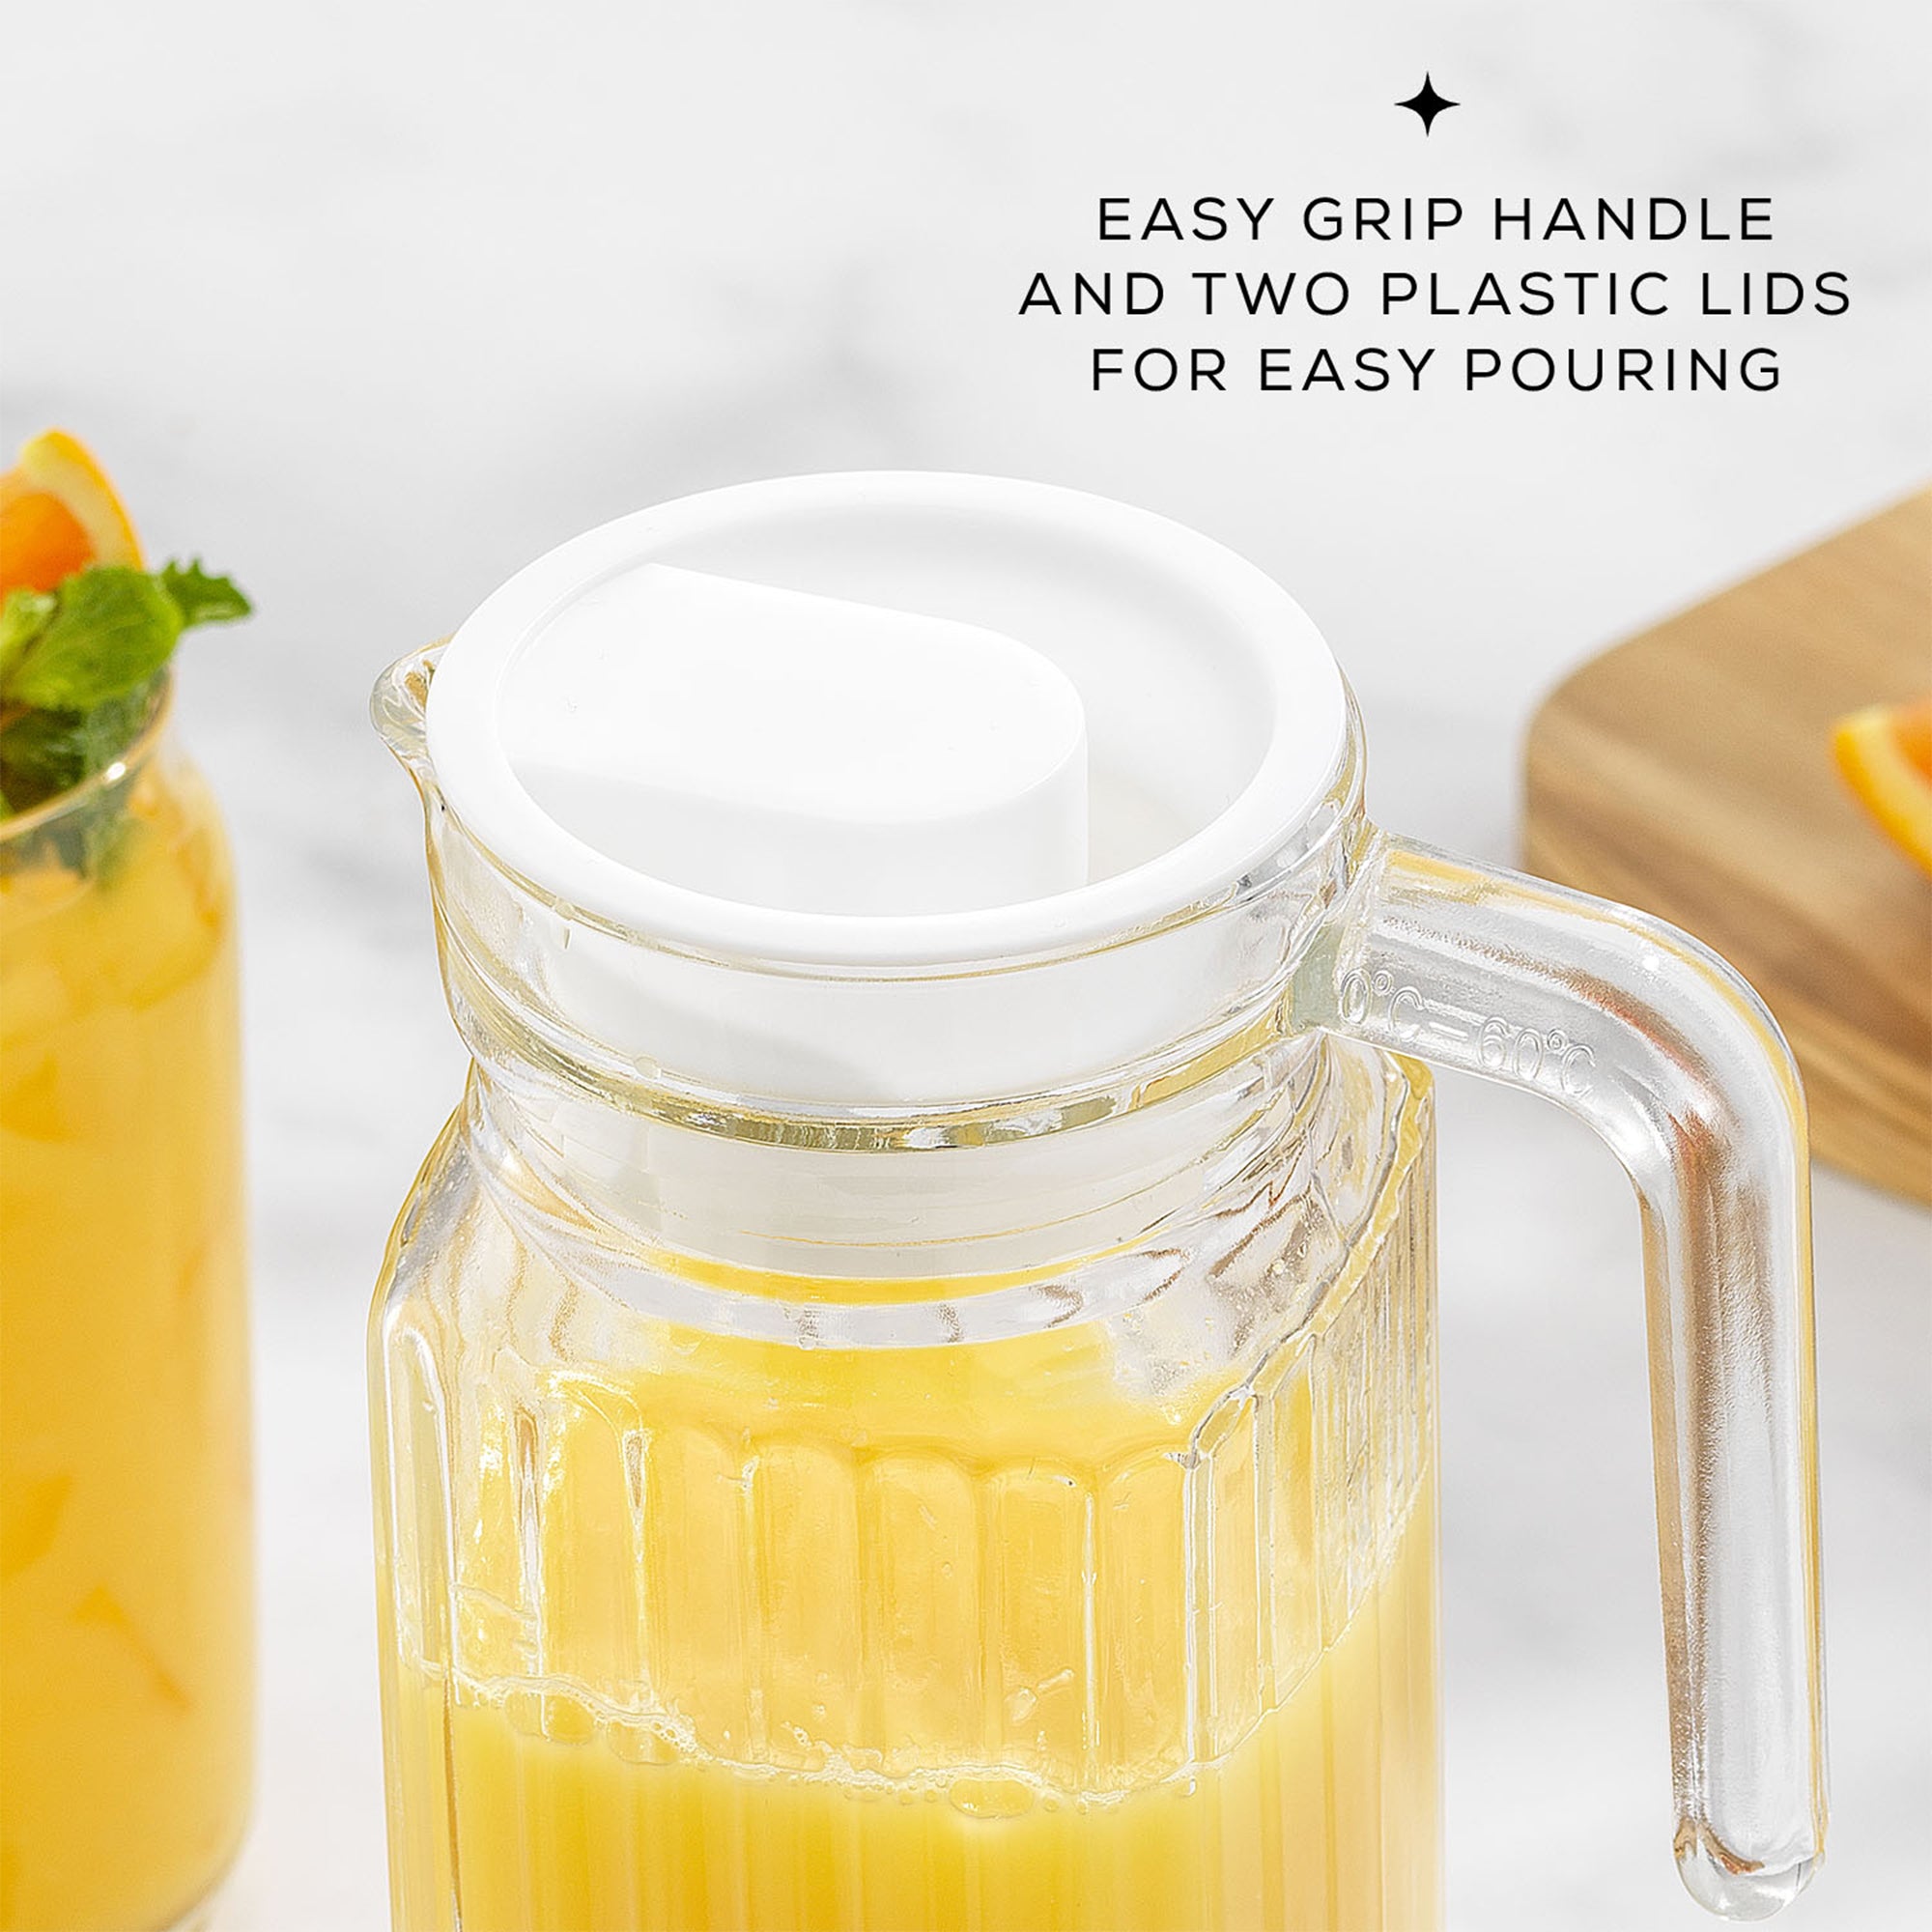 A 40-ounce JoyJolt Beverage Serveware Glass Pitcher filled with orange juice sits on a table. The pitcher has a clear glass body, a white lid, and a handle for easy pouring. Text on the image reads "EASY GRIP HANDLE AND TWO PLASTIC LIDS FOR EASY POURING".